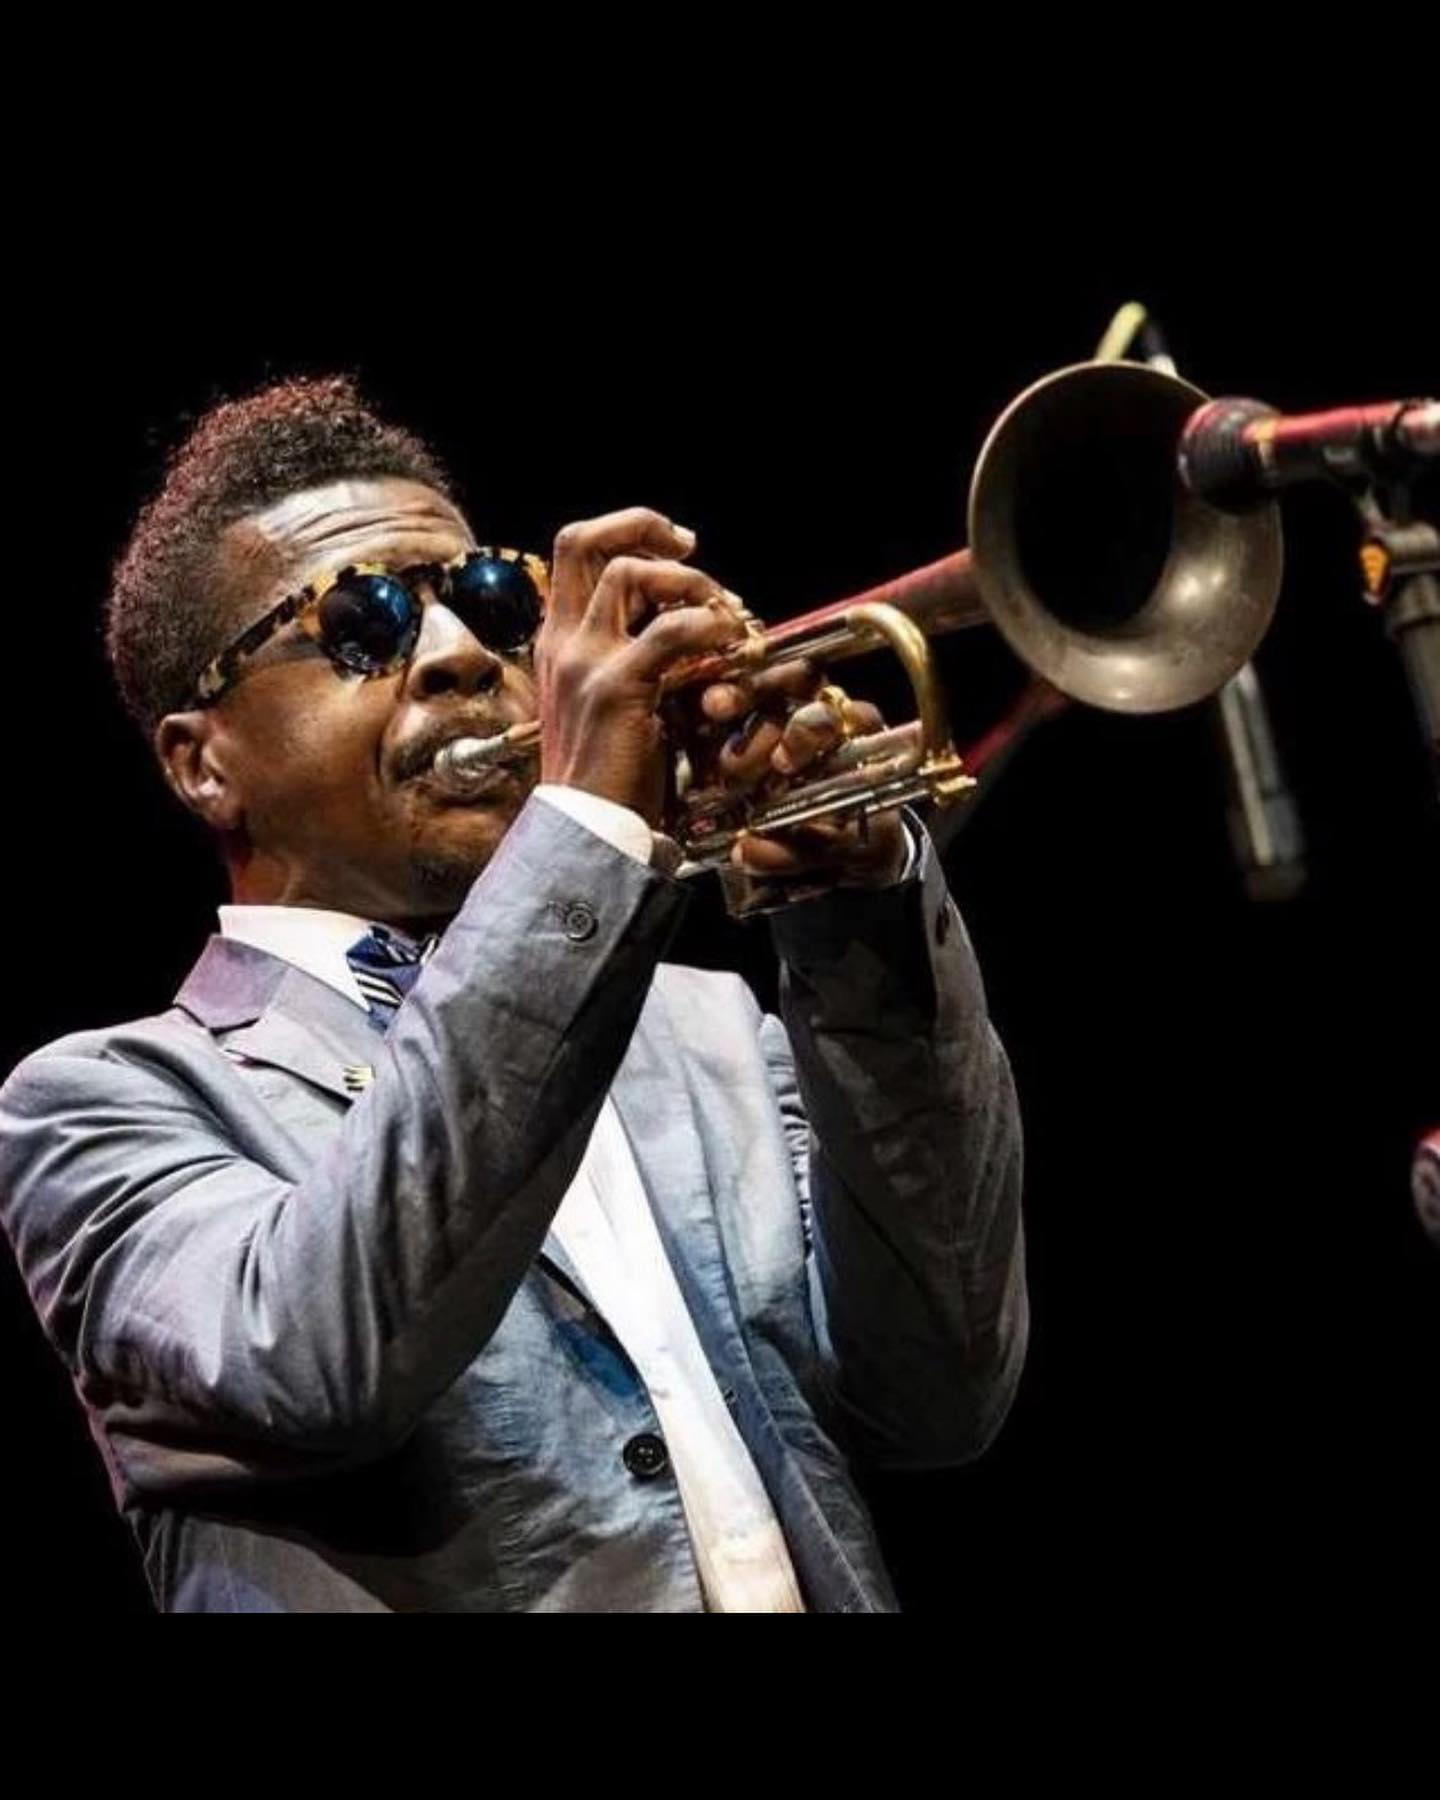 Jazz, Blues And Lounge Music - American legendary trumpet player Roy Hargrove #royhargrove #trumpet